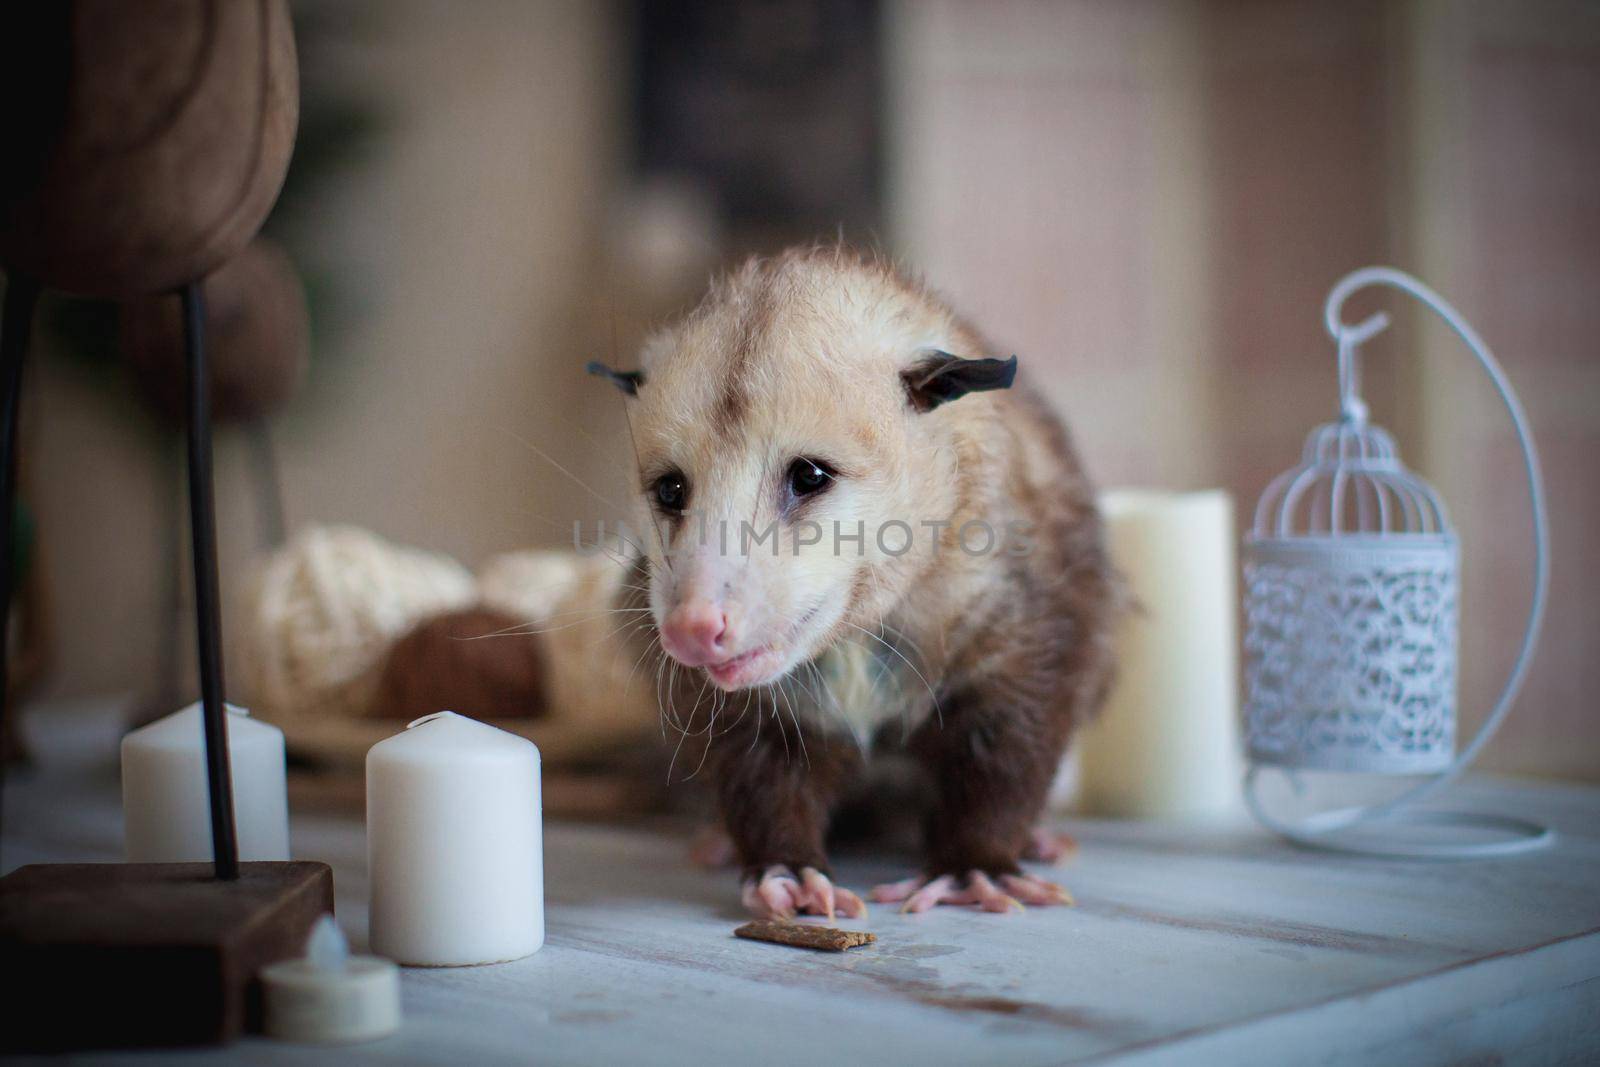 The Virginia or North American opossum, Didelphis virginiana, on a table